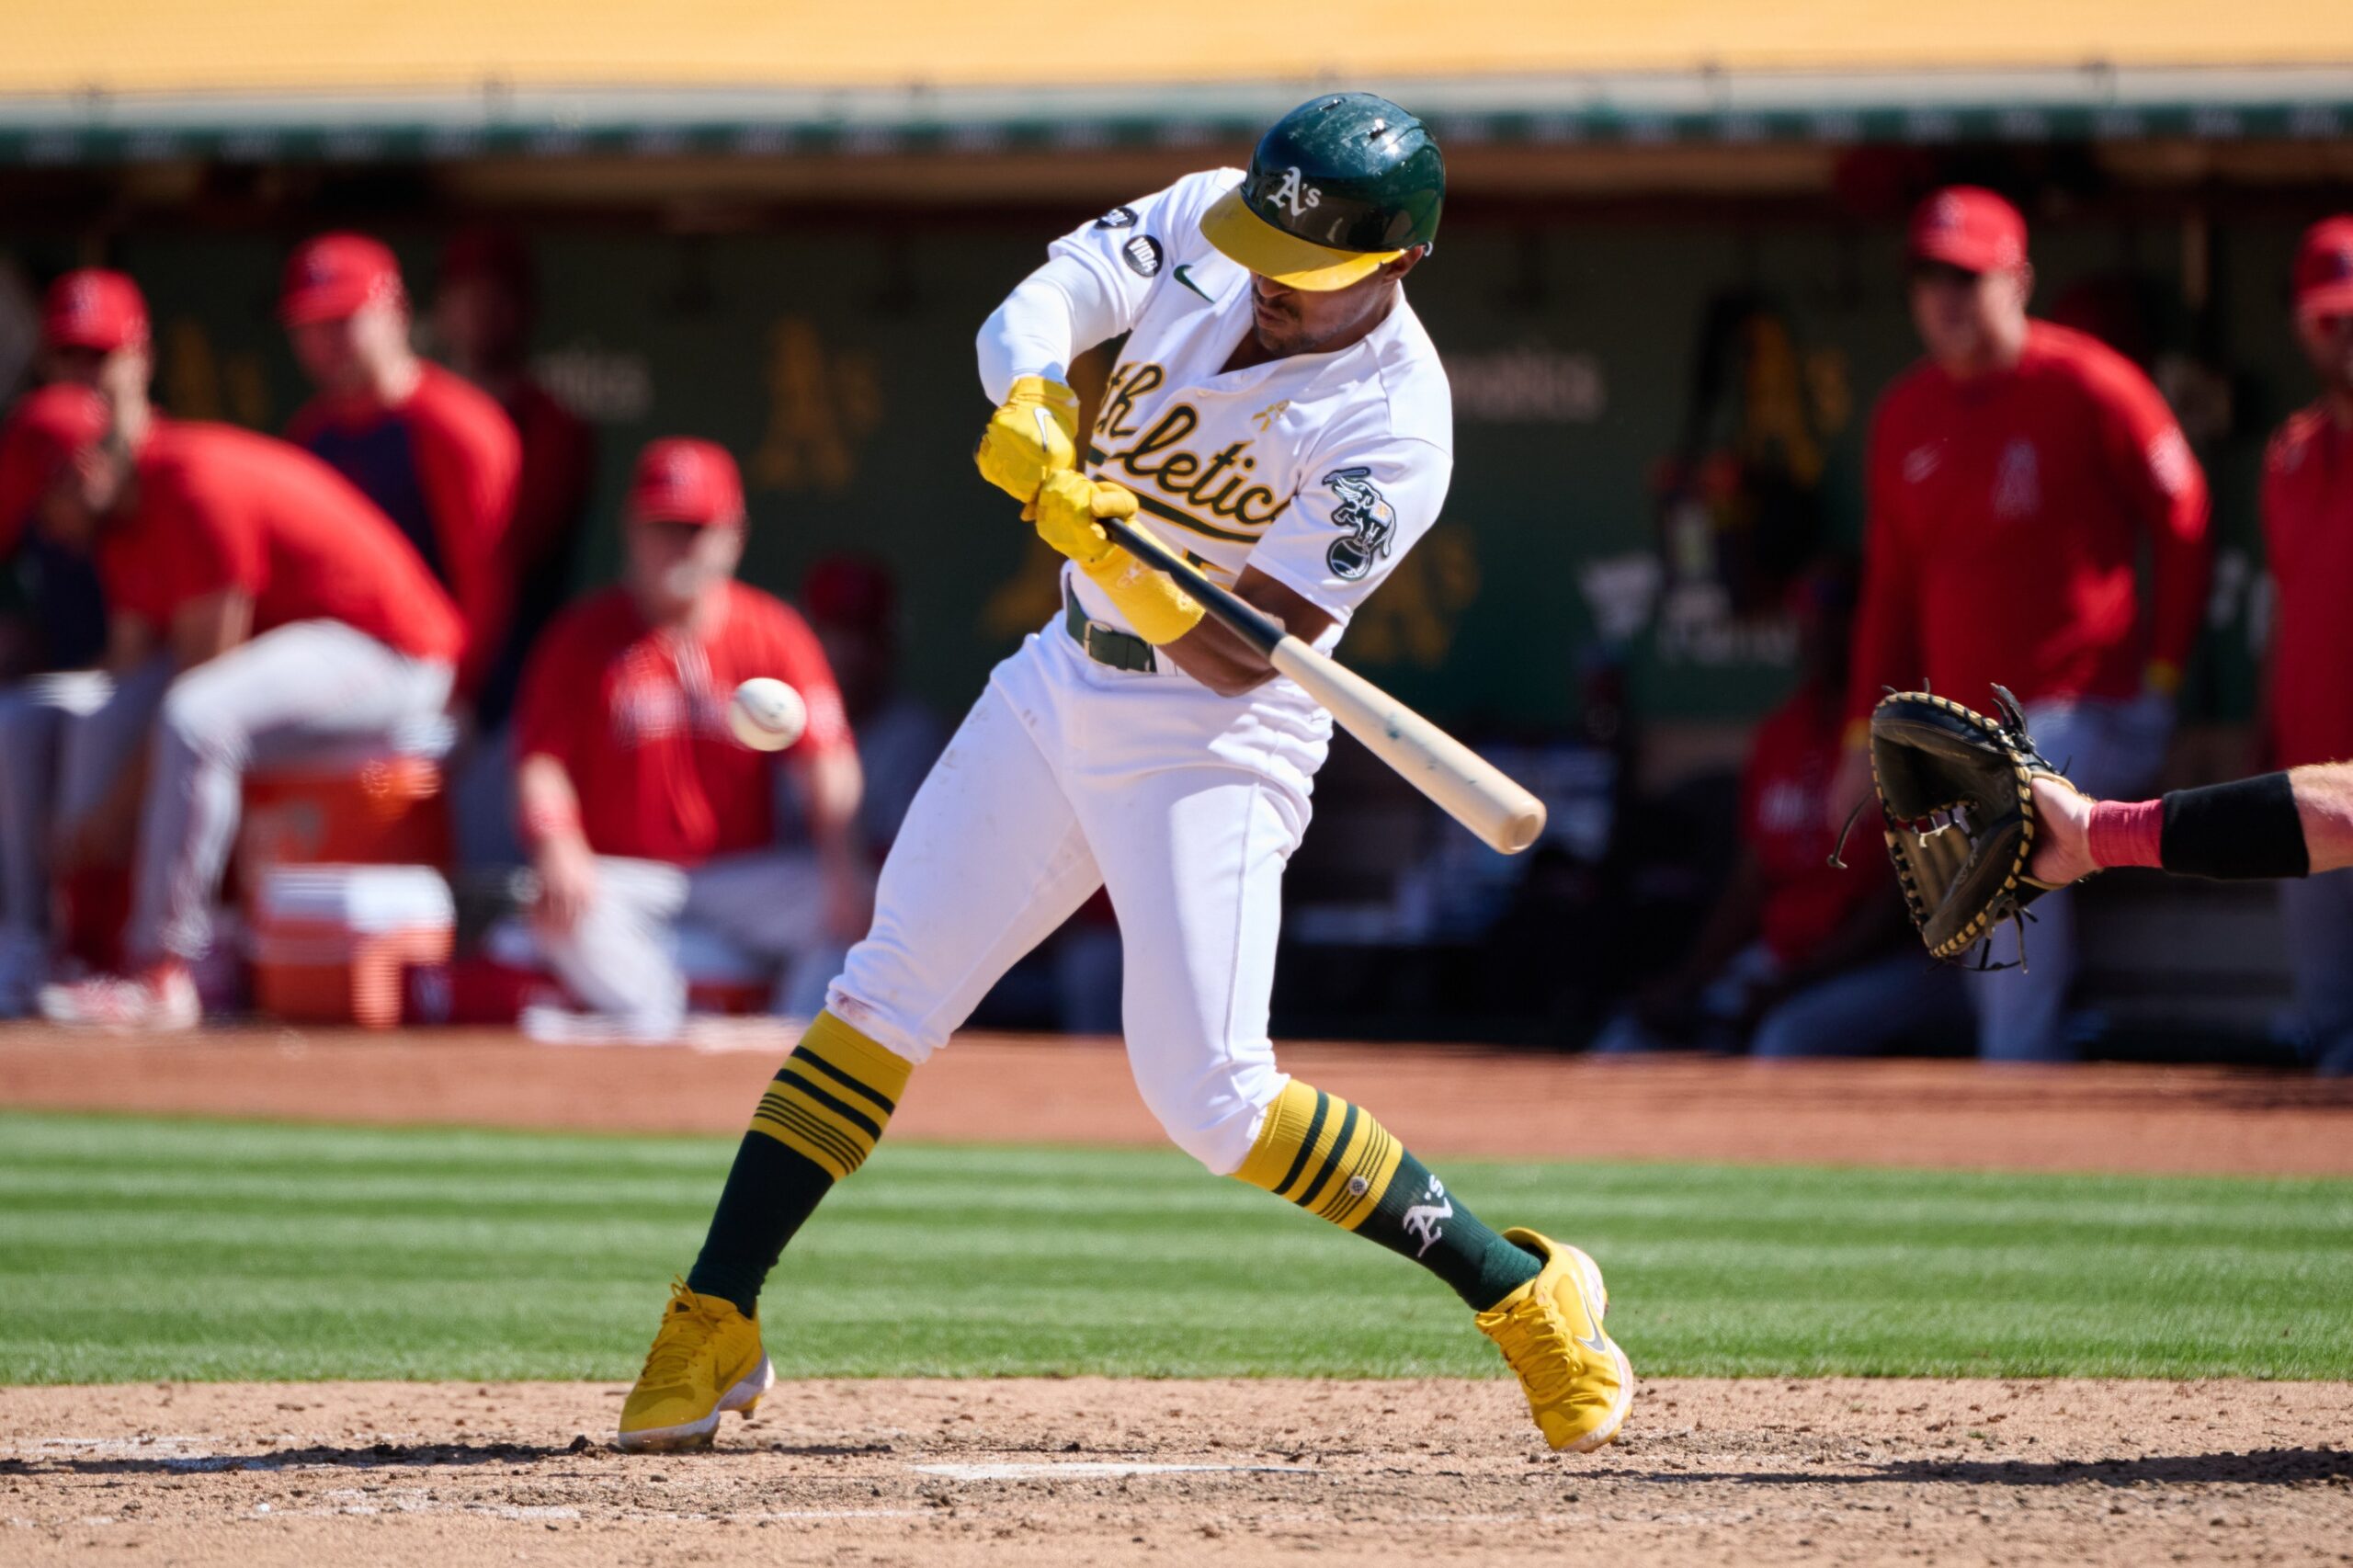 Orioles Sign Former A's Utility Infielder on MLB Deal